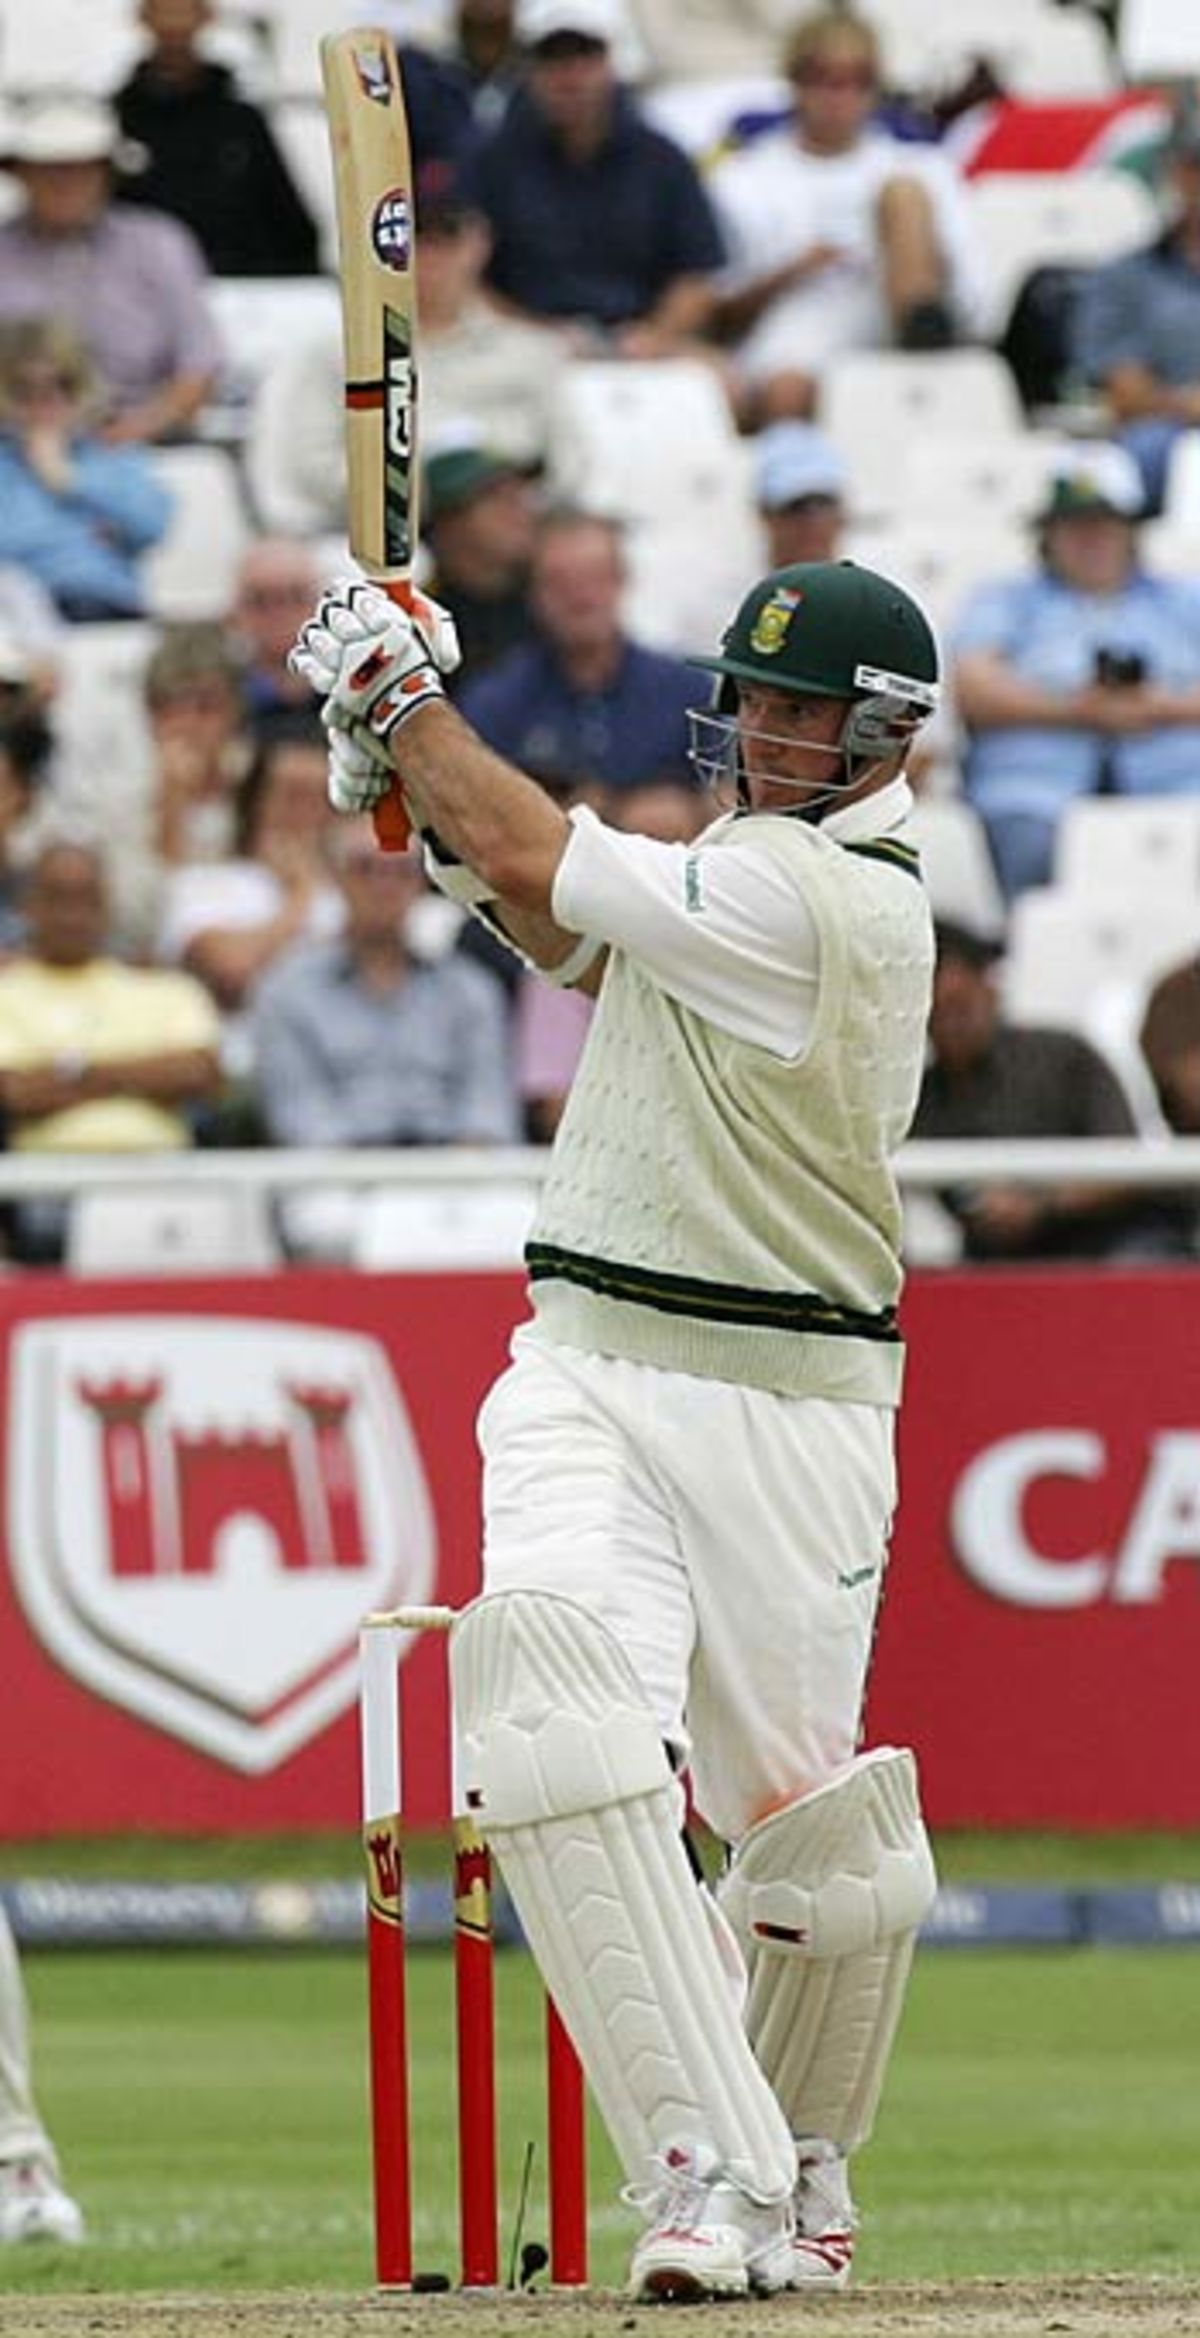 Graeme Smith works to leg, South Africa v Australia, 1st Test, Cape Town, March 16, 2006